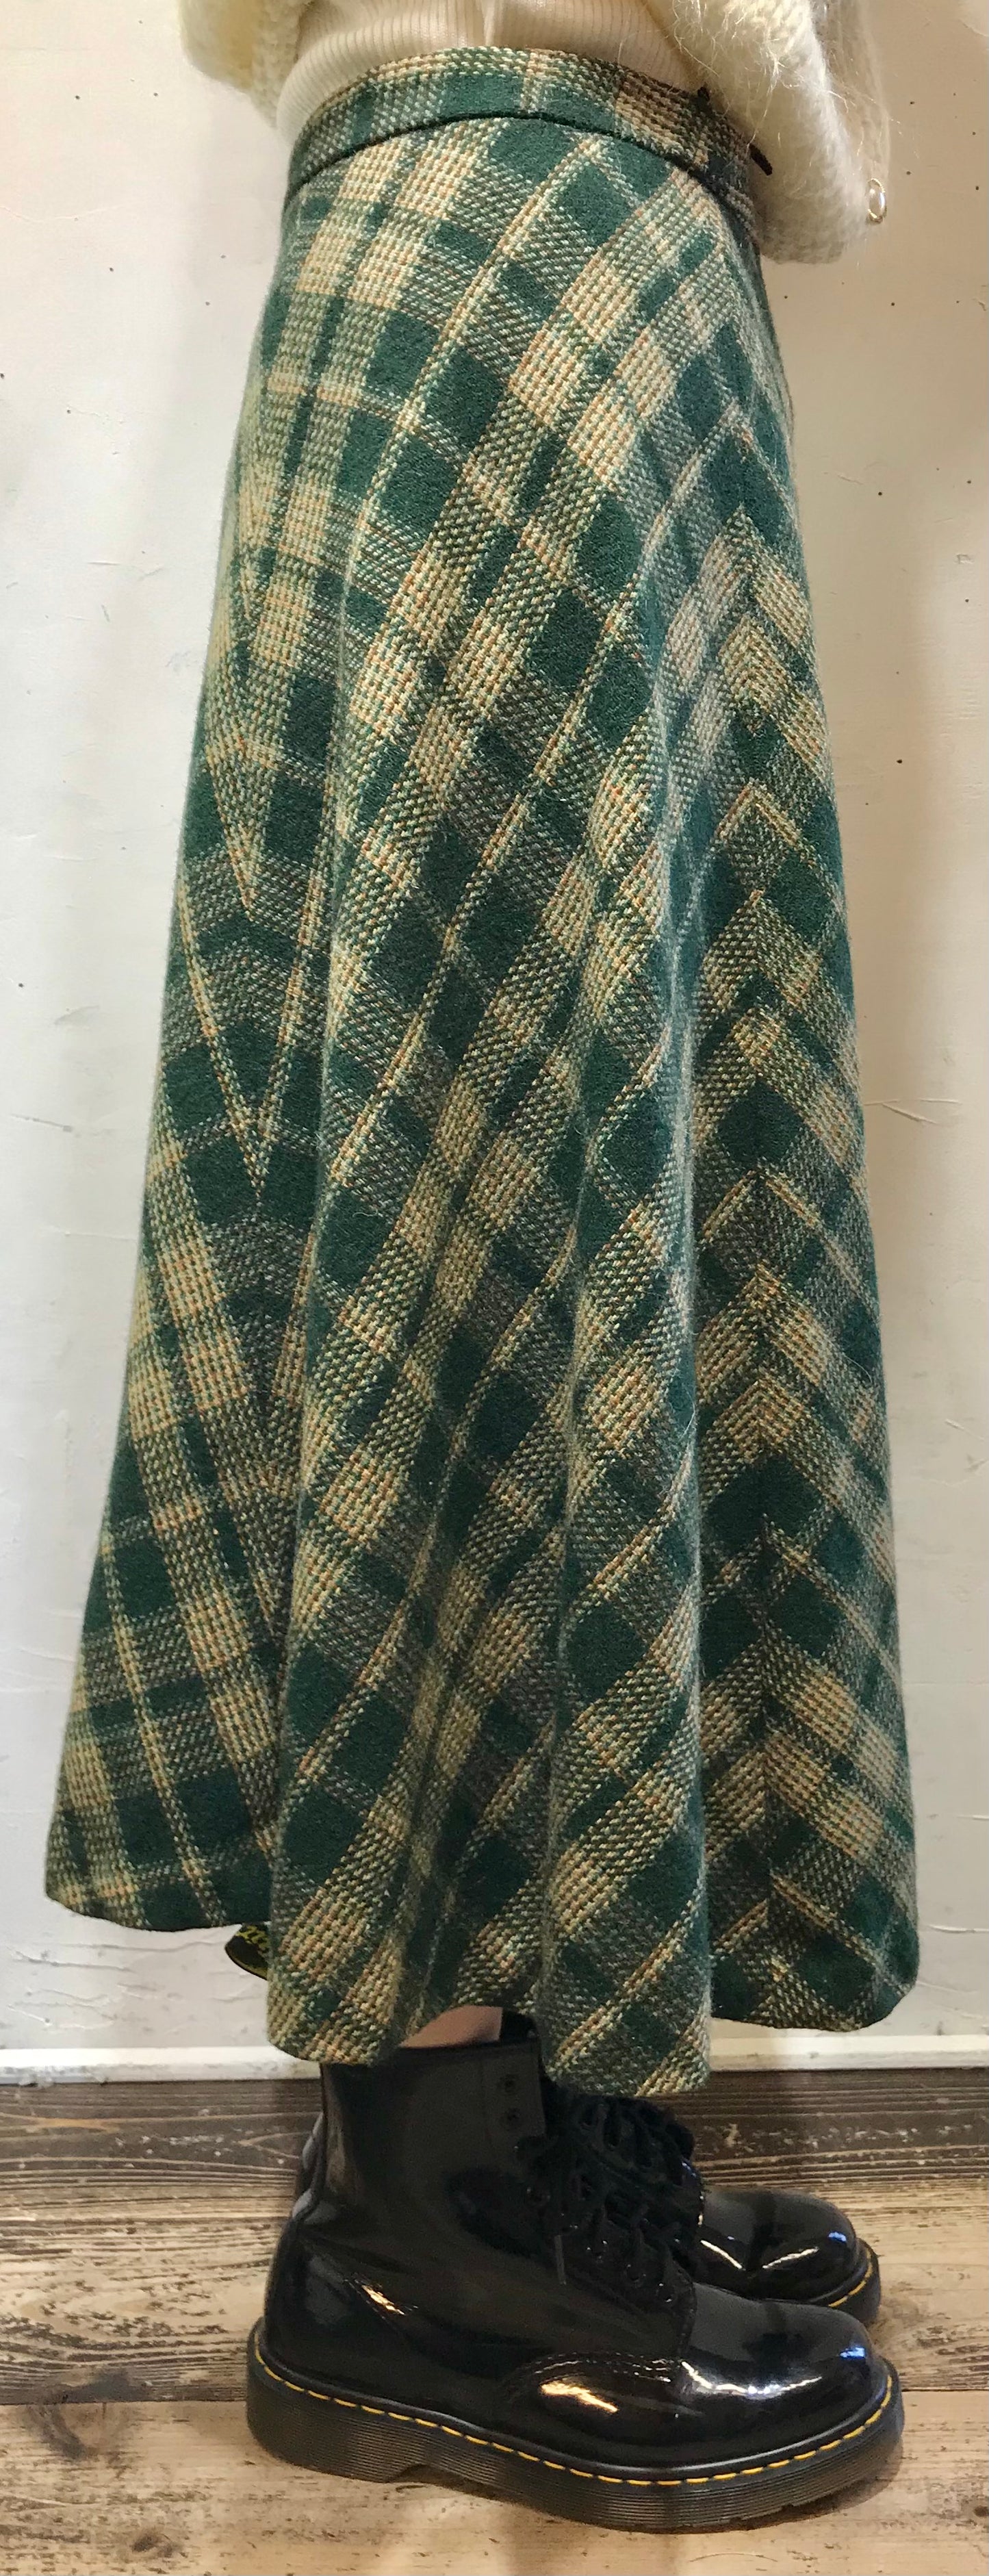 Vintage Plaid Skirt MADE IN FRANCE [A25936]